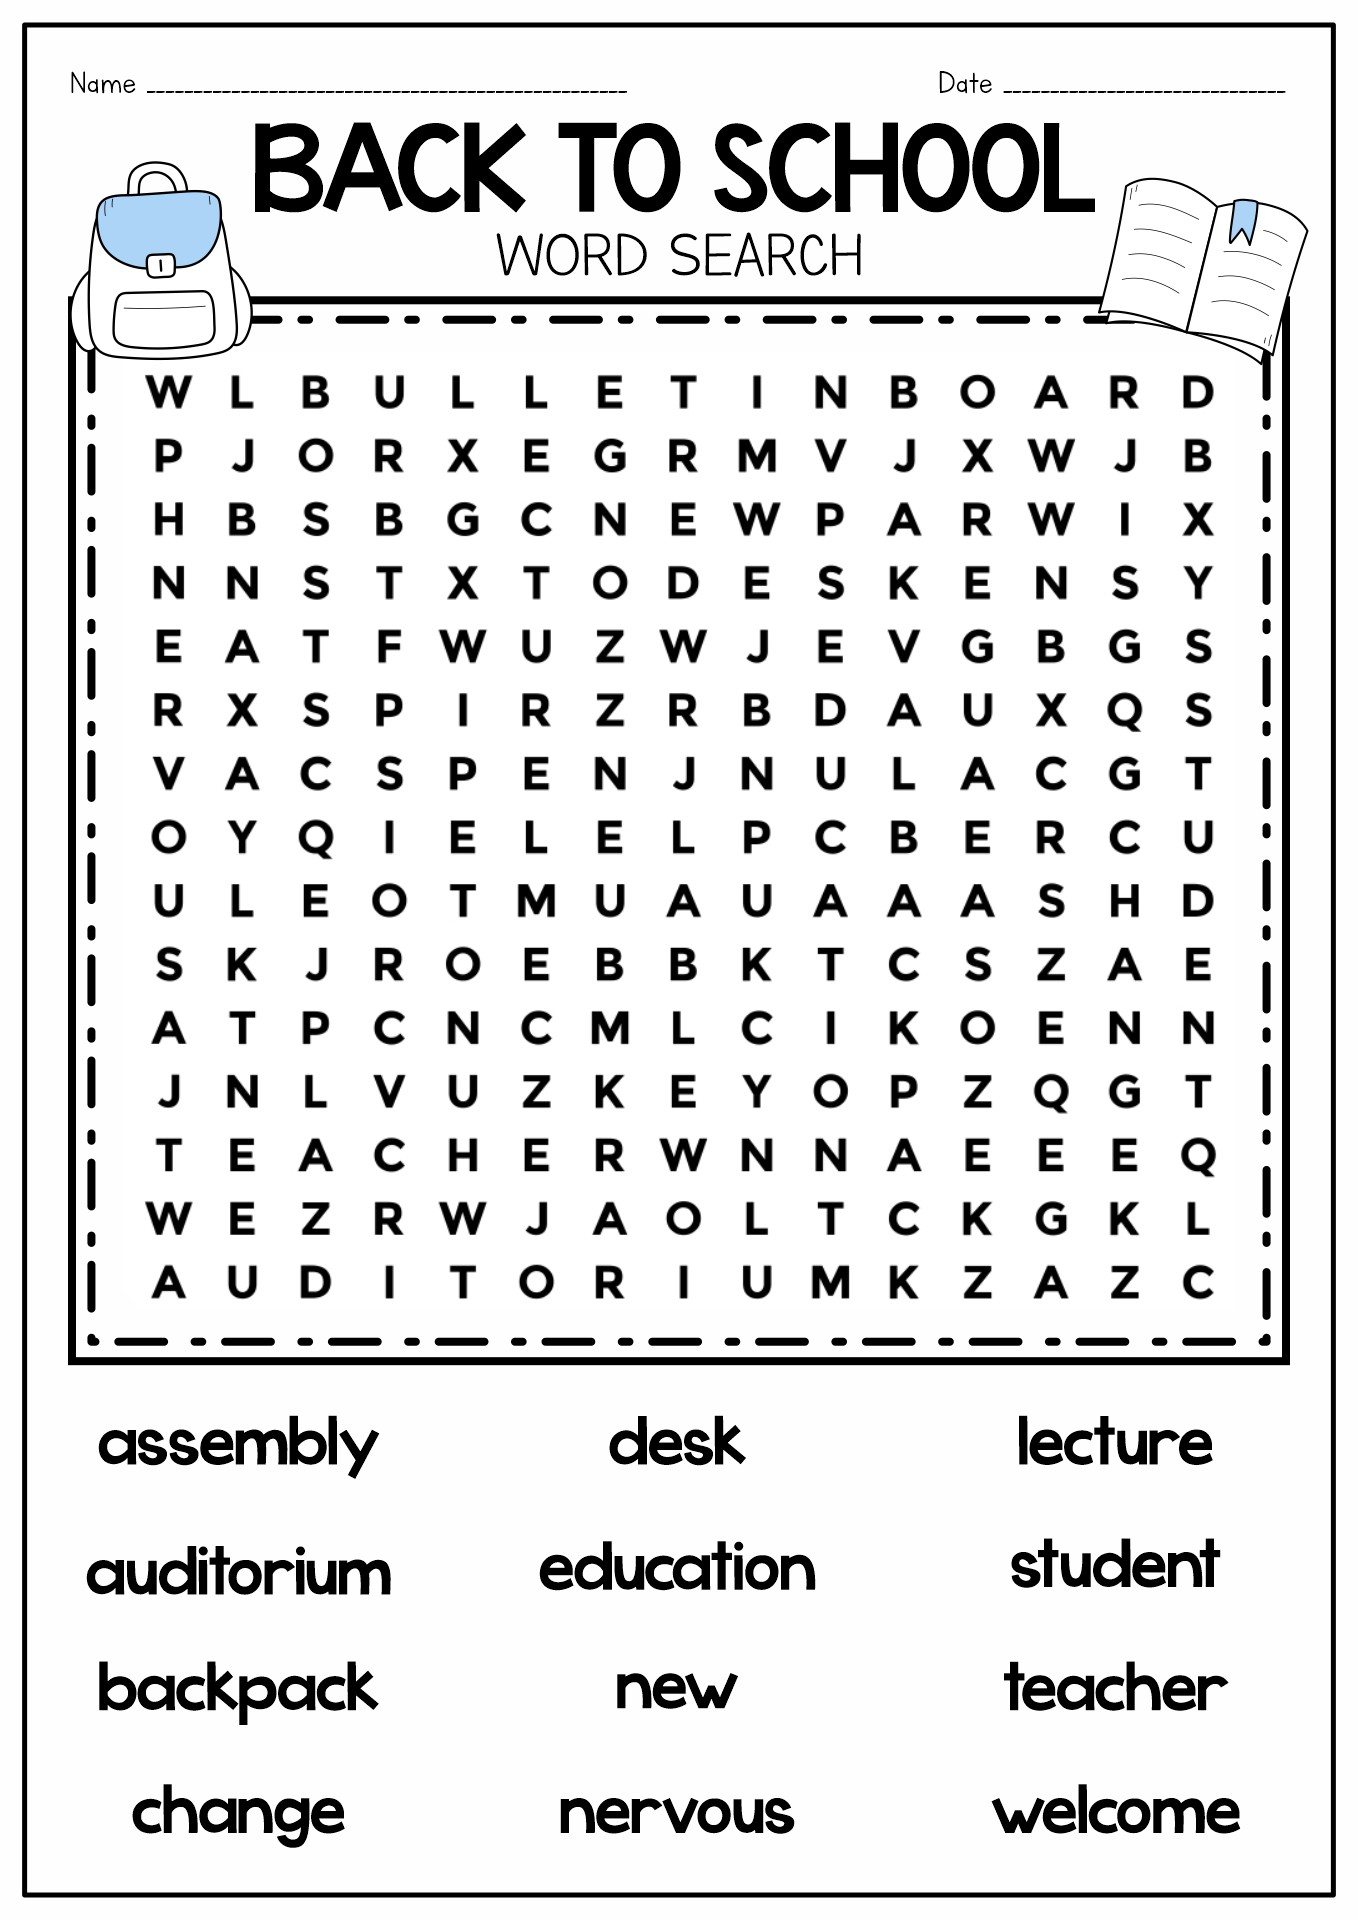 Back to School Word Search Worksheets Image